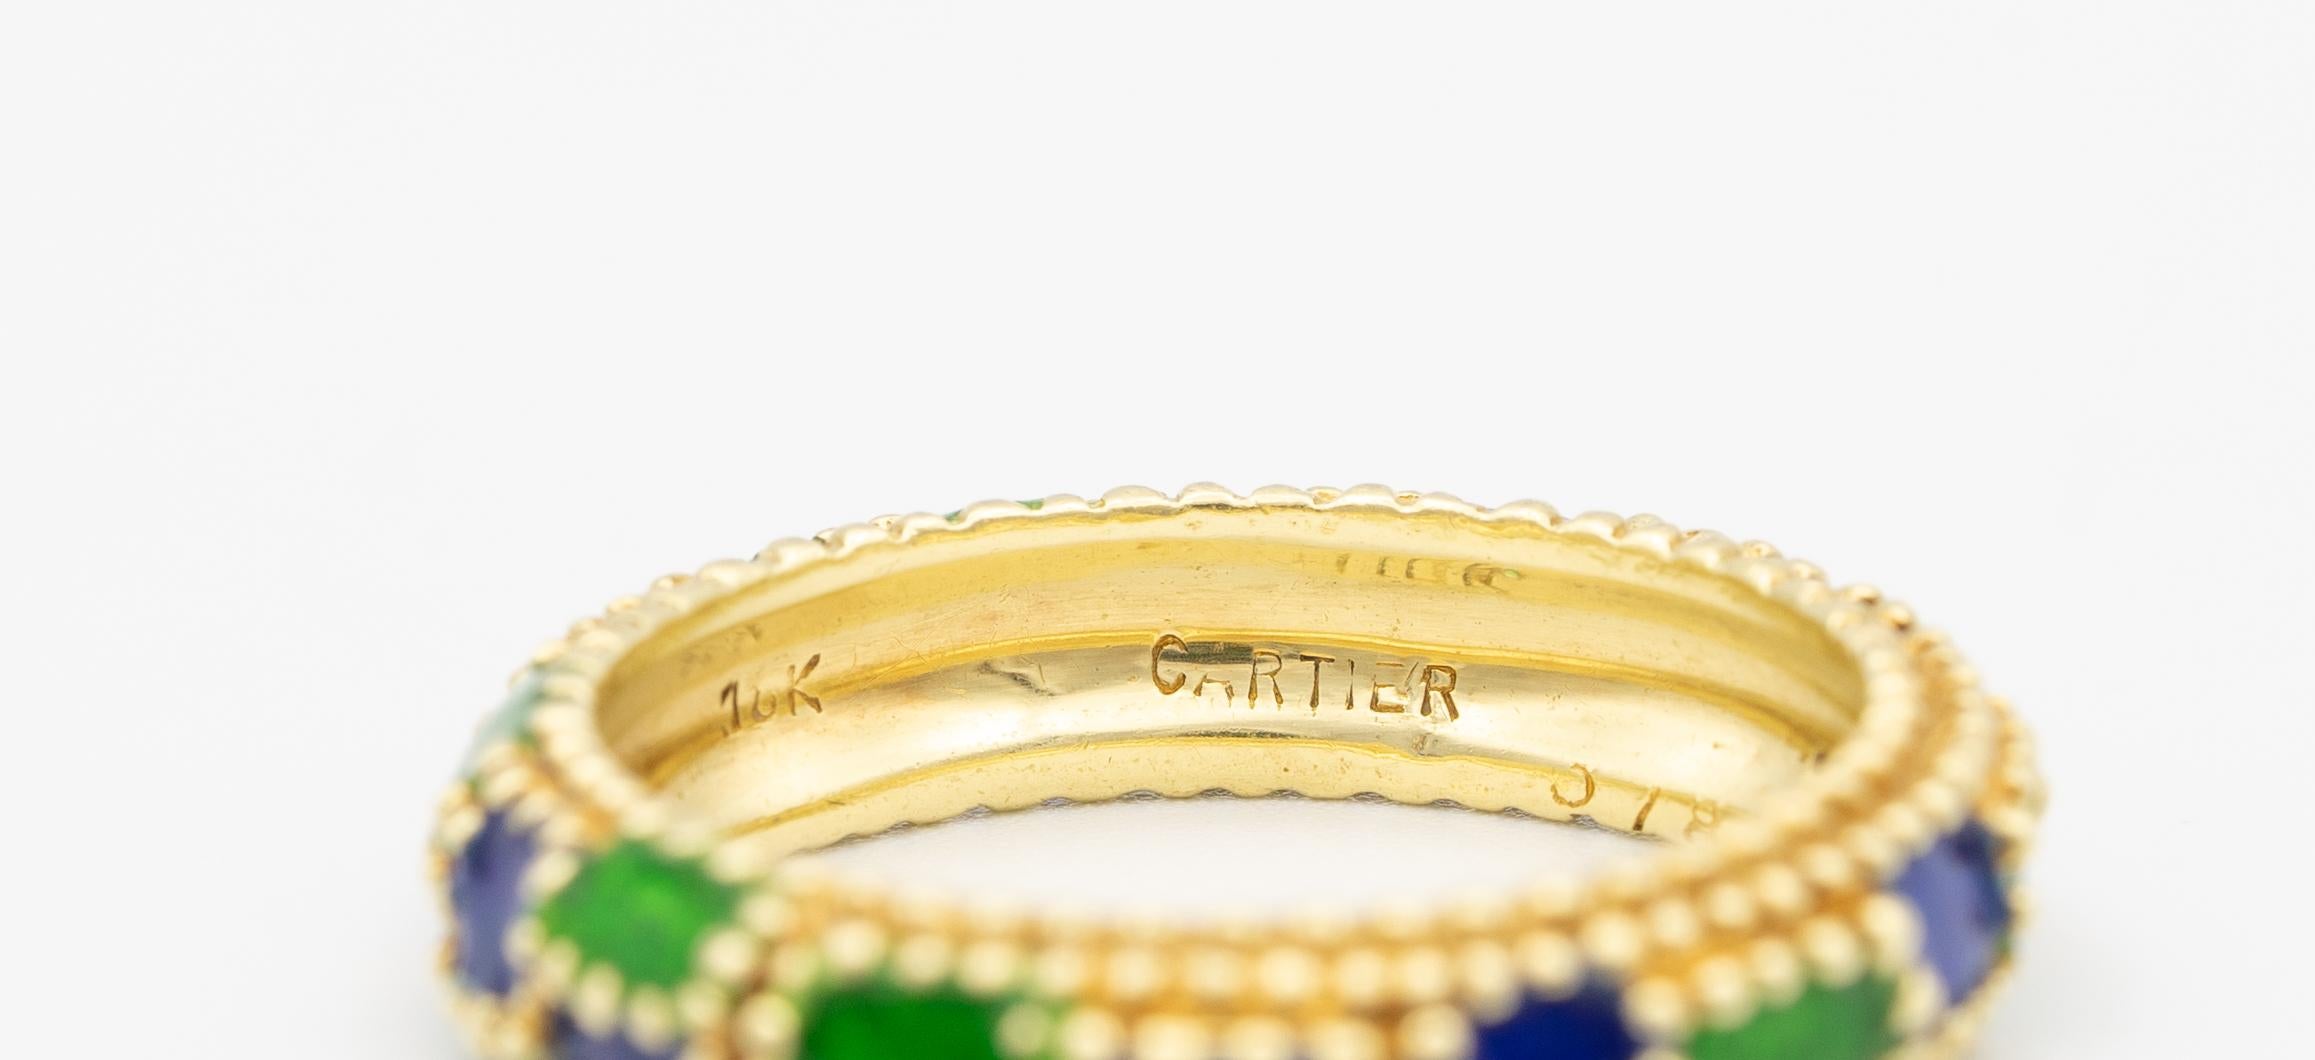 Cartier ring finely crafted in 18K Yellow gold with Blue and Green enamel.
Beaded details. Domed band
Size: 6 1/2
Width: 3/16